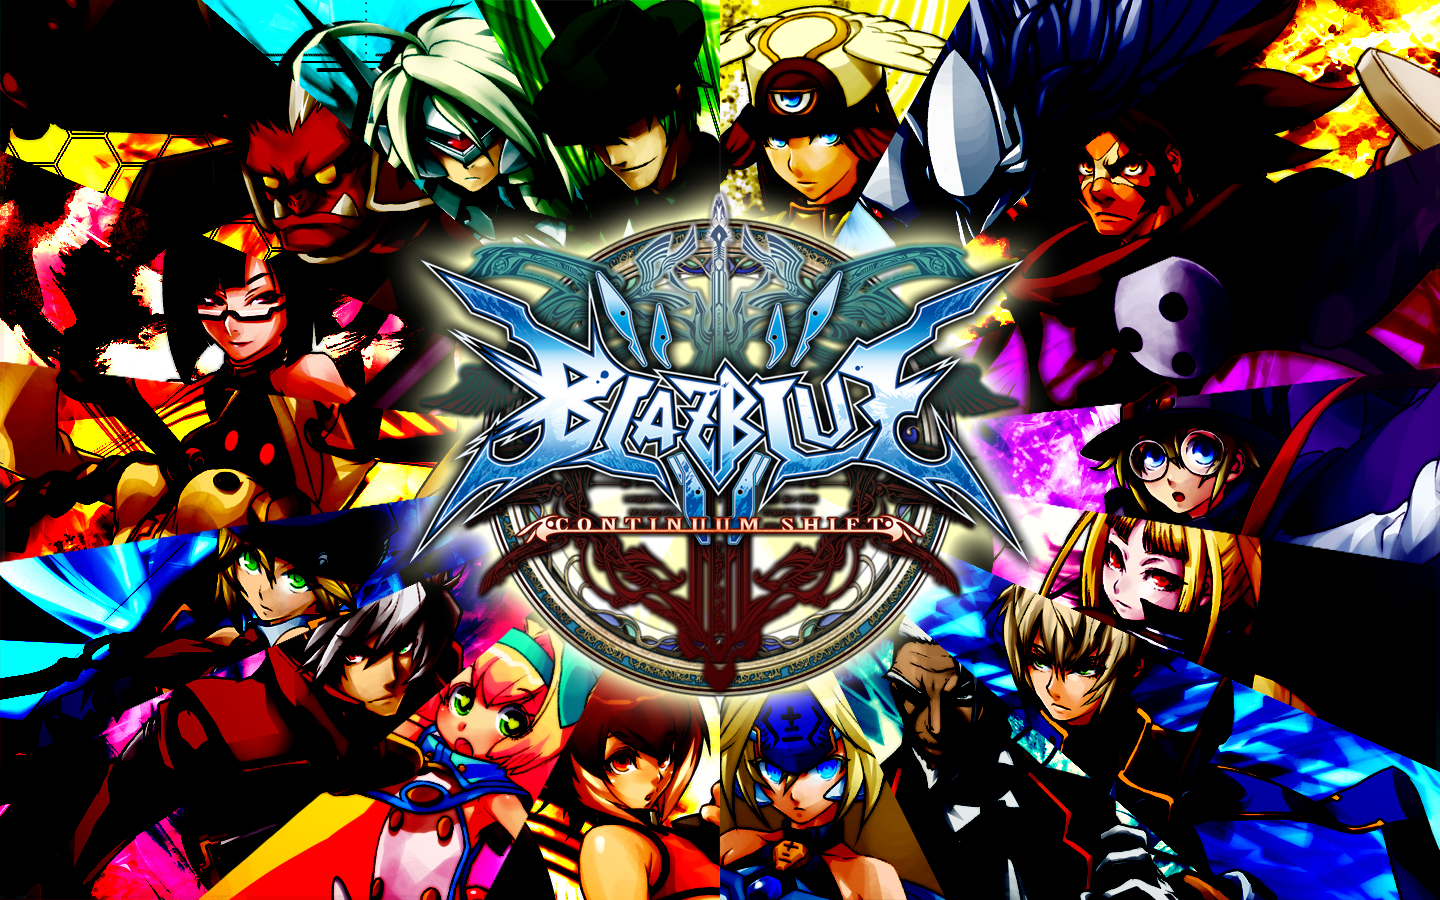 The New Blazblue Characters Wallpaper